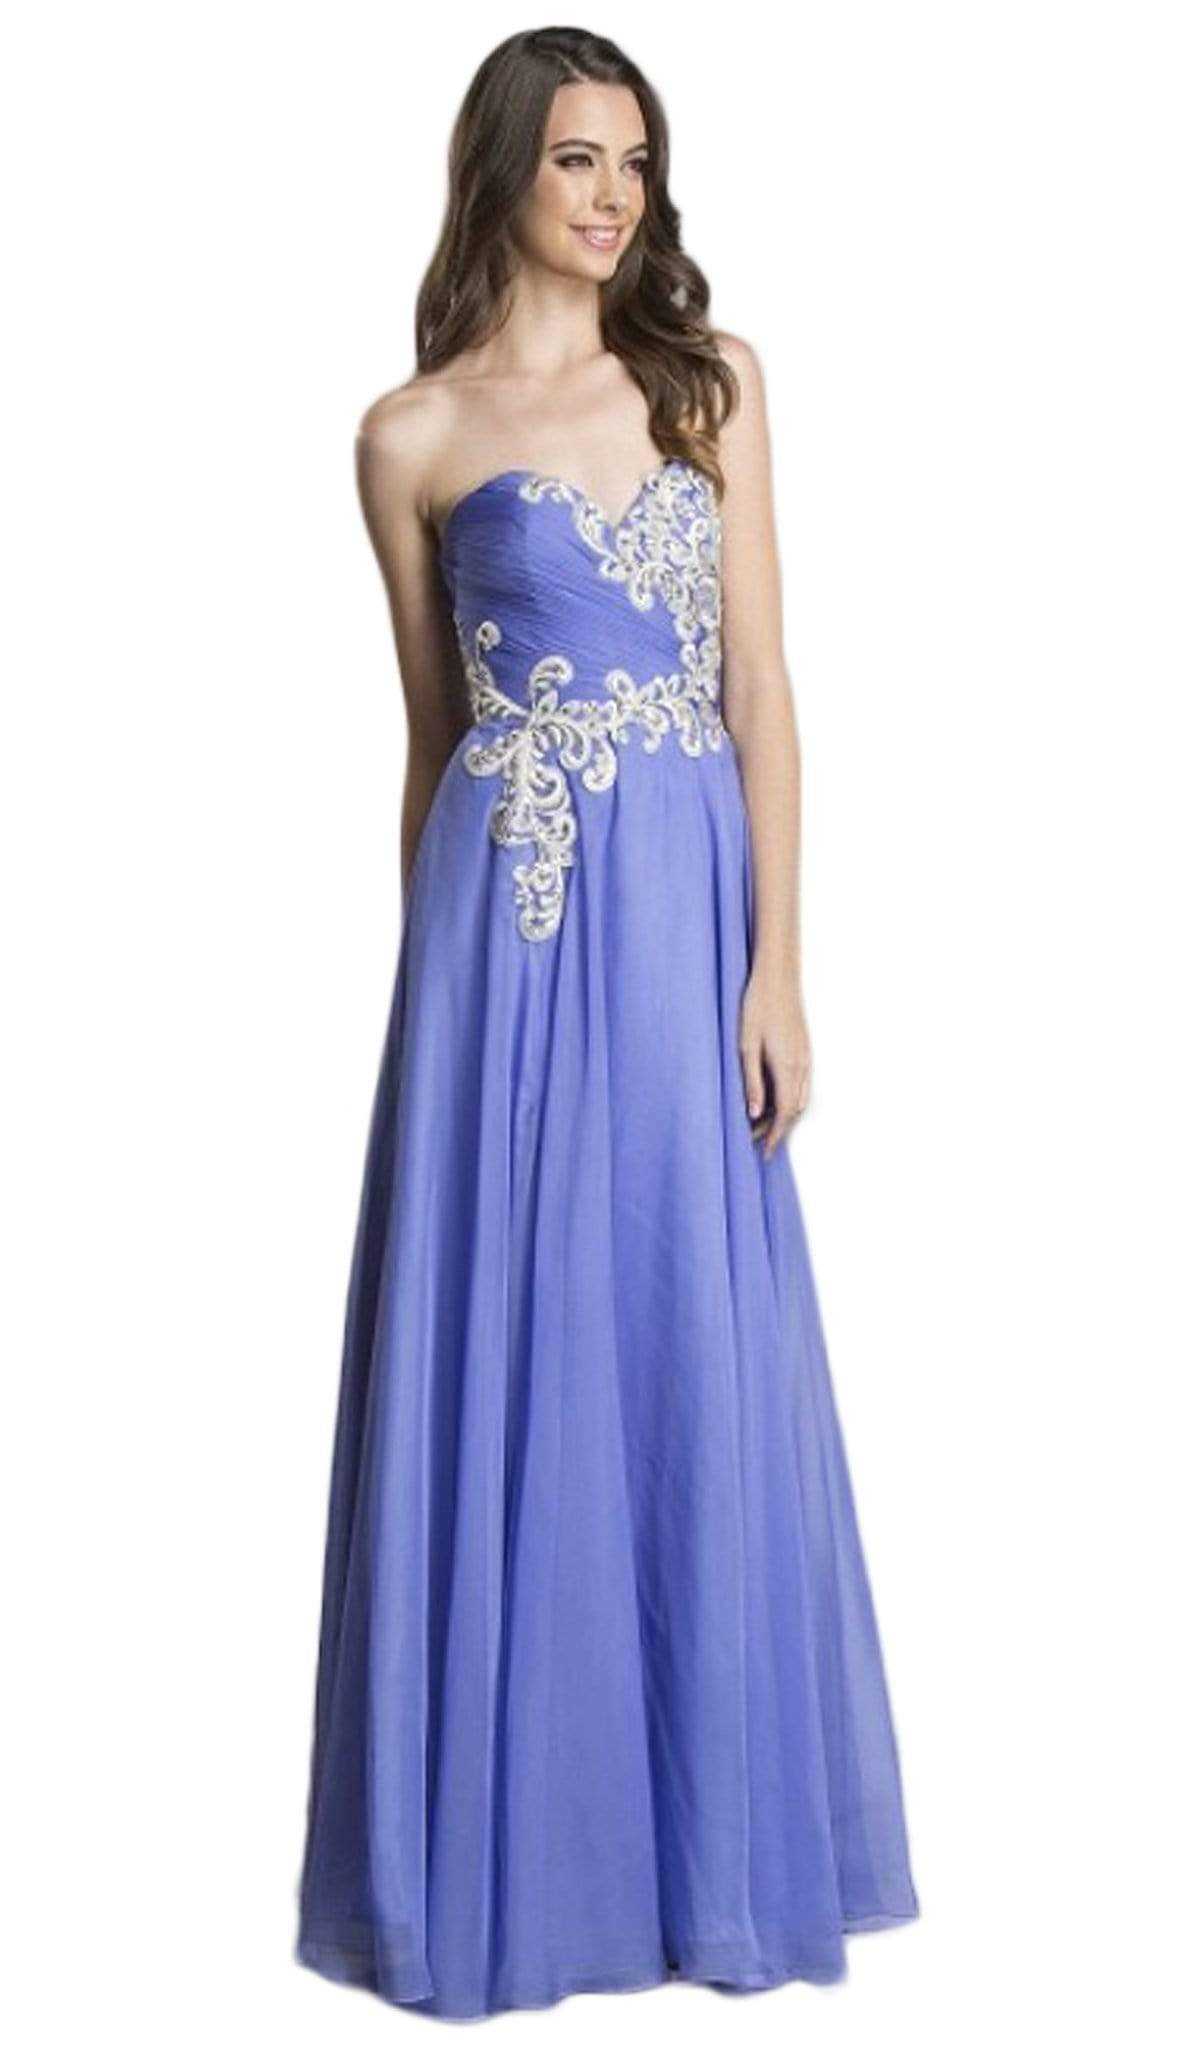 Aspeed Design, Aspeed Design - Strapless Ruched A-Line Affordable Prom Gown